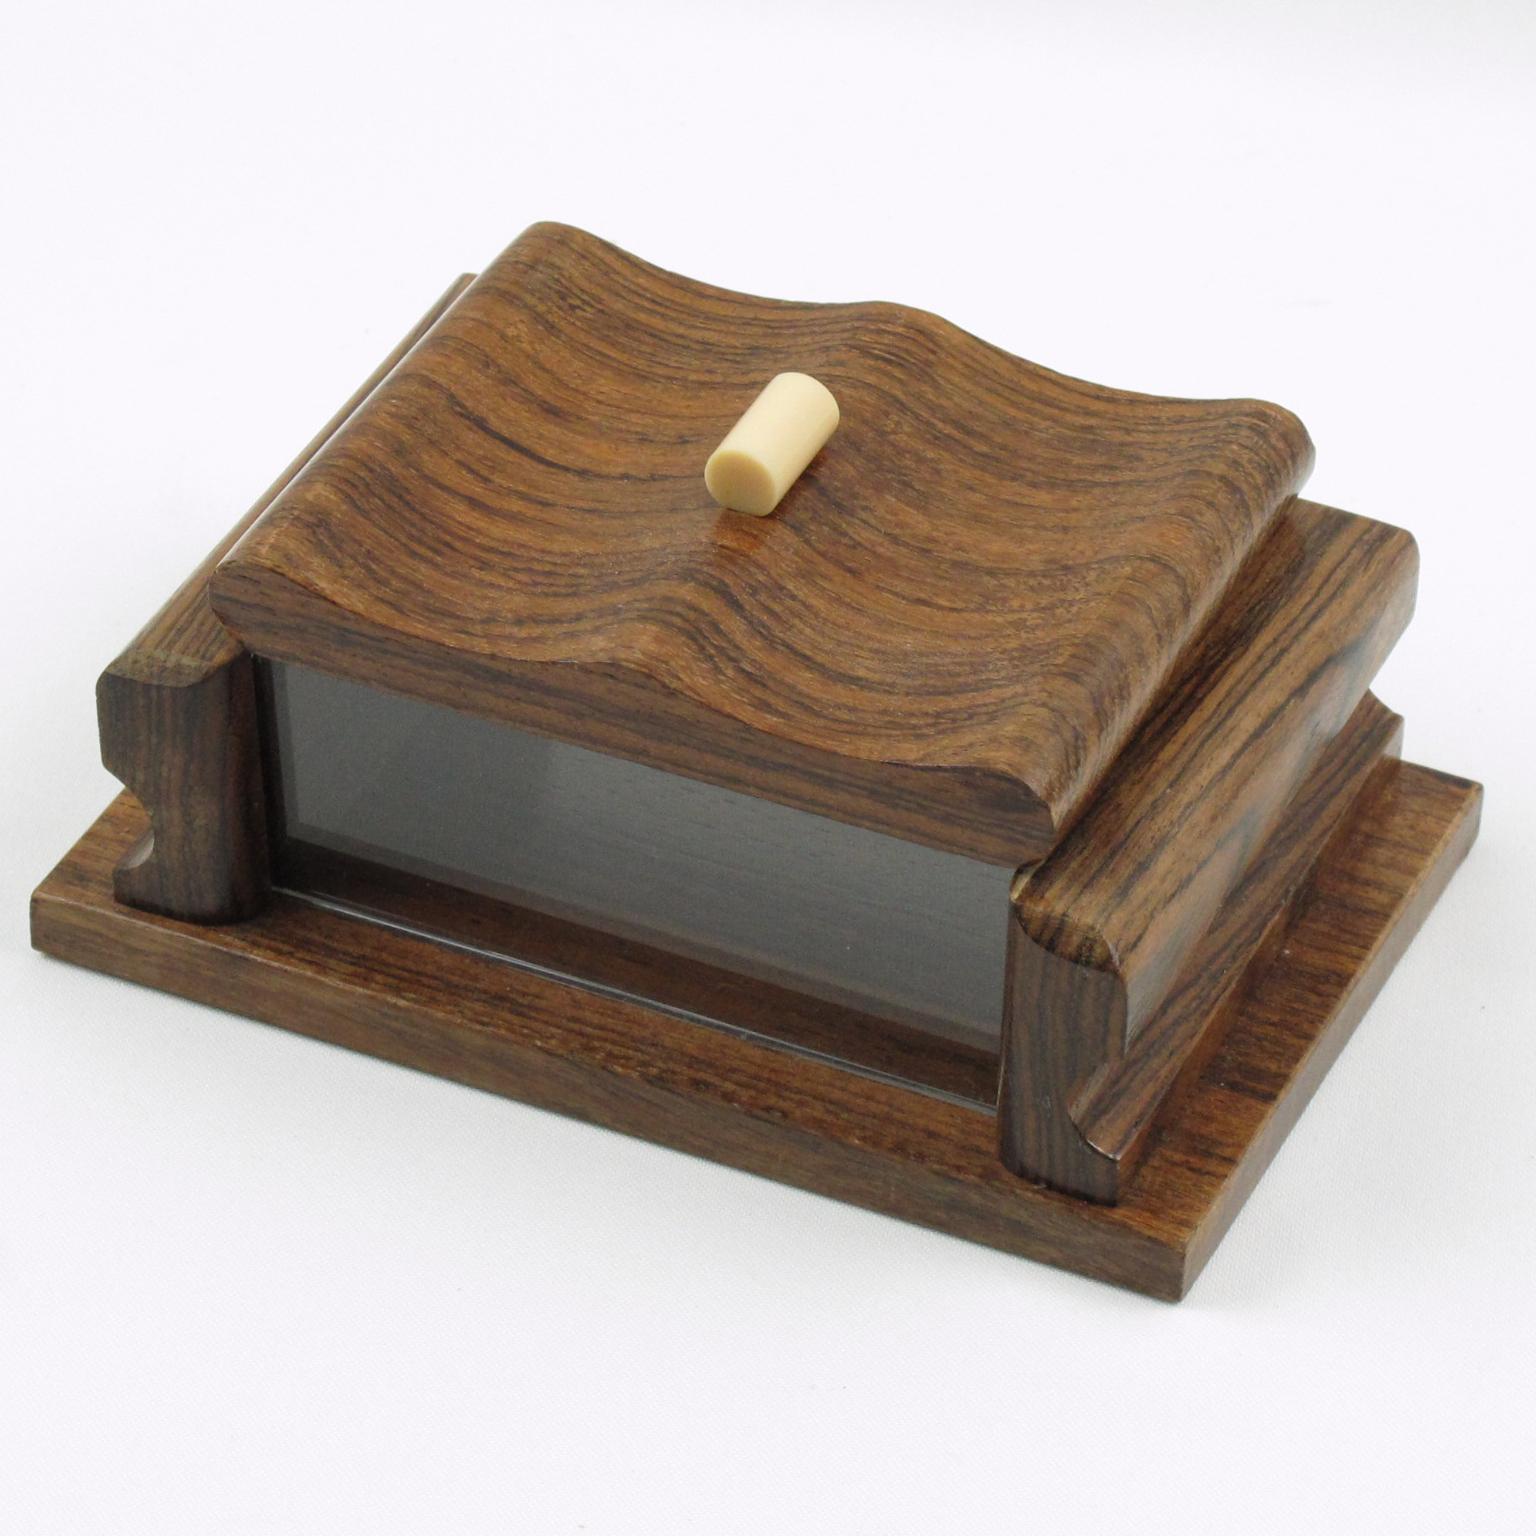 Art Deco Wood and Lucite Box, 1940s For Sale 1